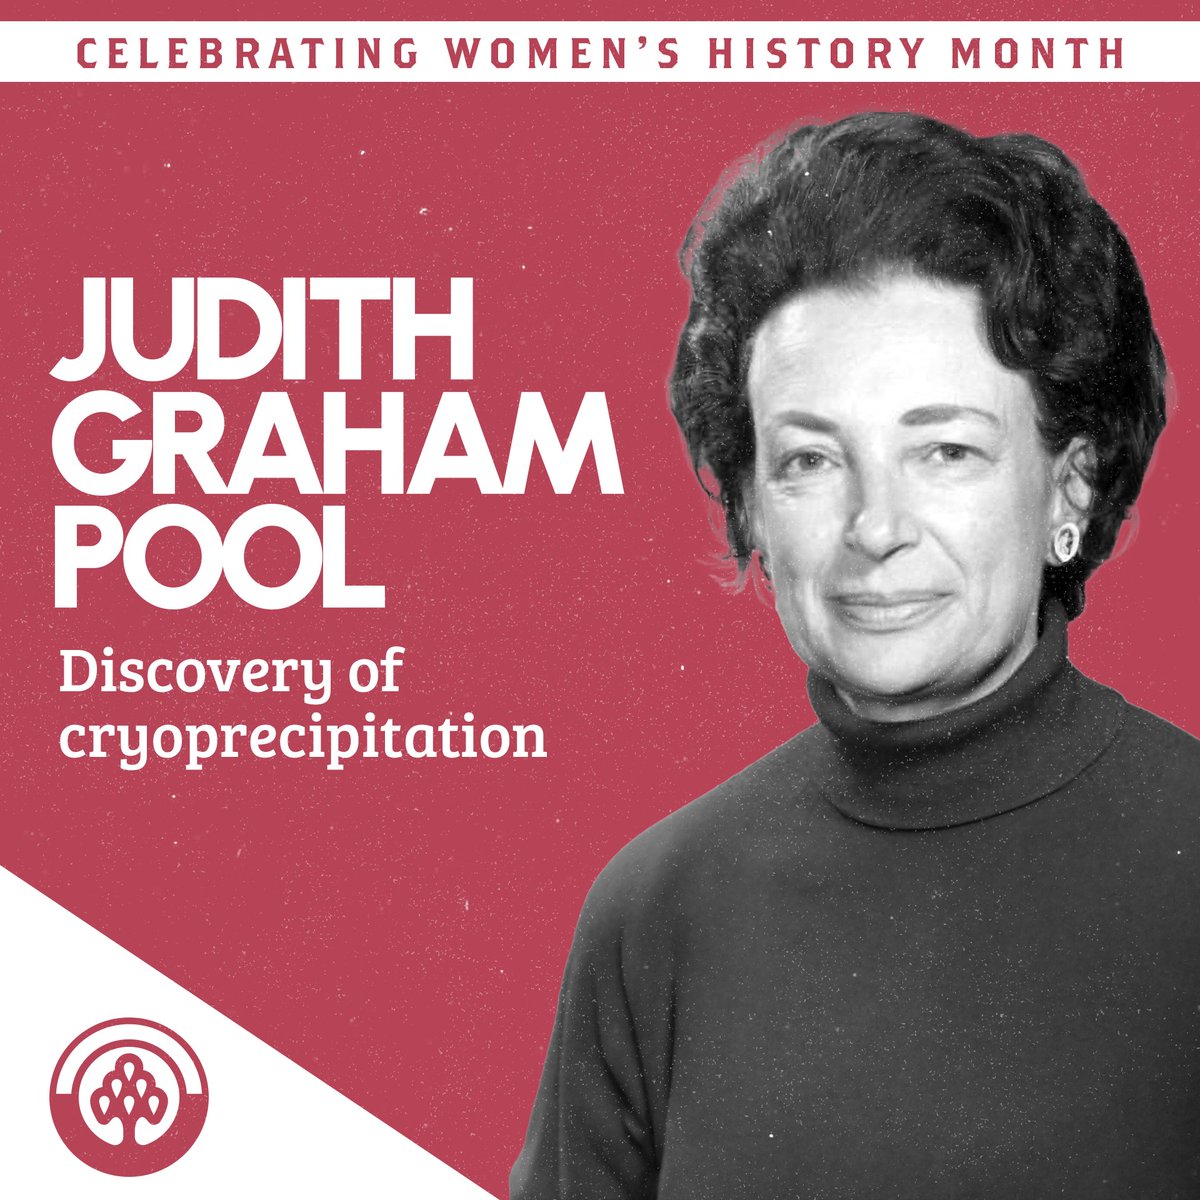 Dr. Judith Graham Pool revolutionized the treatment of hemophilia. Her work on isolating Factor VIII led to the creation of cryoprecipitate, changing lives for those with bleeding disorders. Learn more about her impact on our blog at weareblood.org/blog/womens-hi… #WomensHistoryMonth